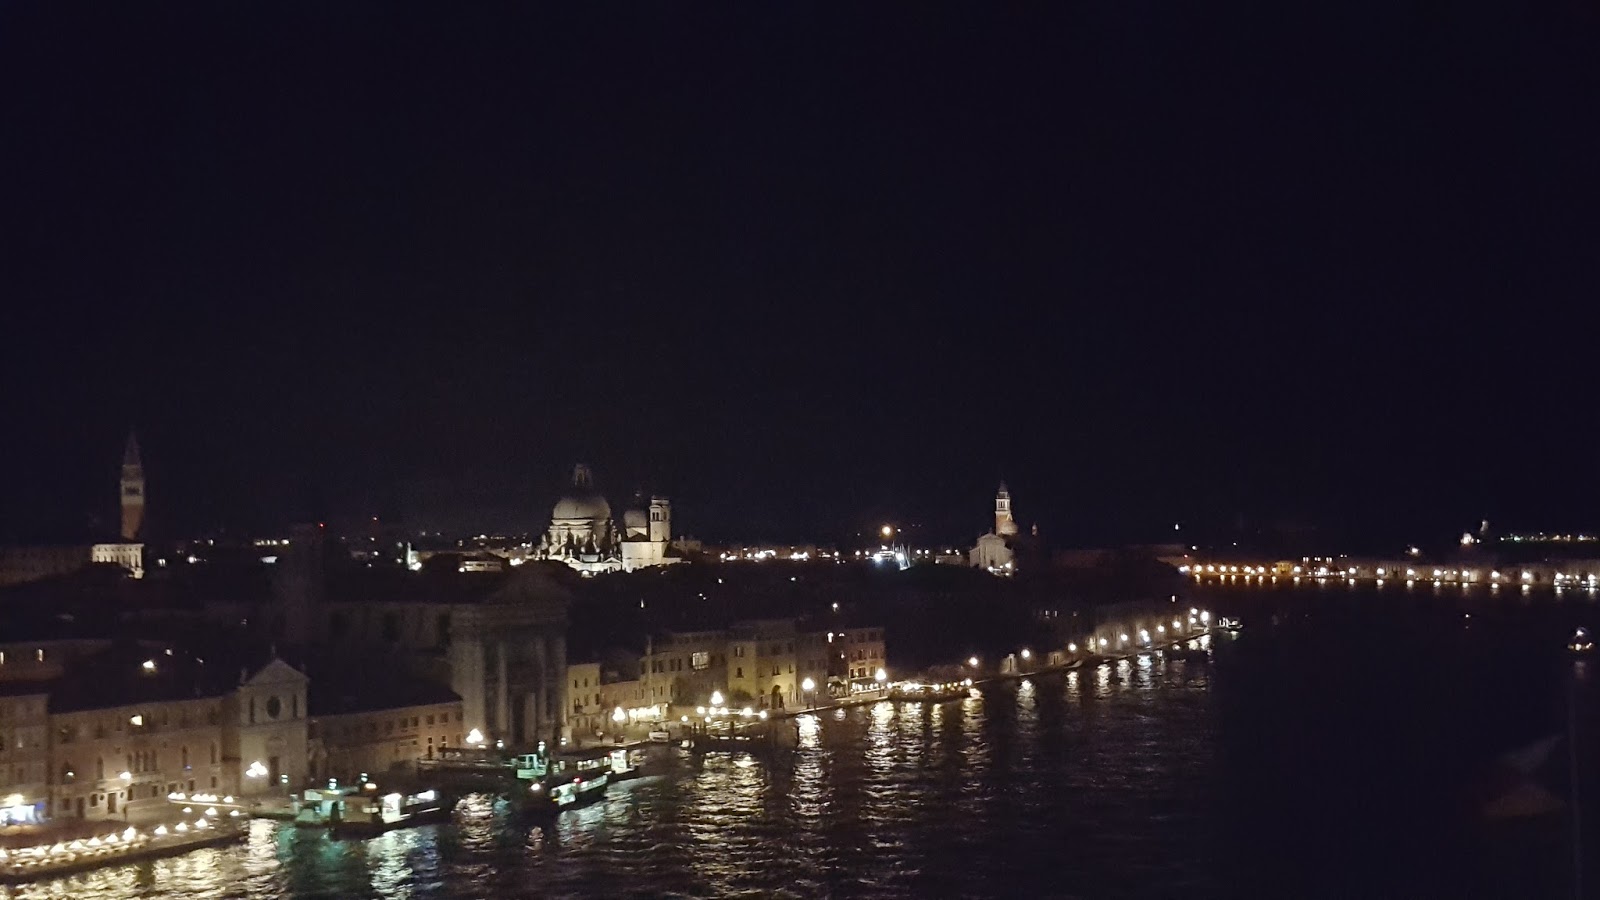 Reasons to go on a cruise Venice at night